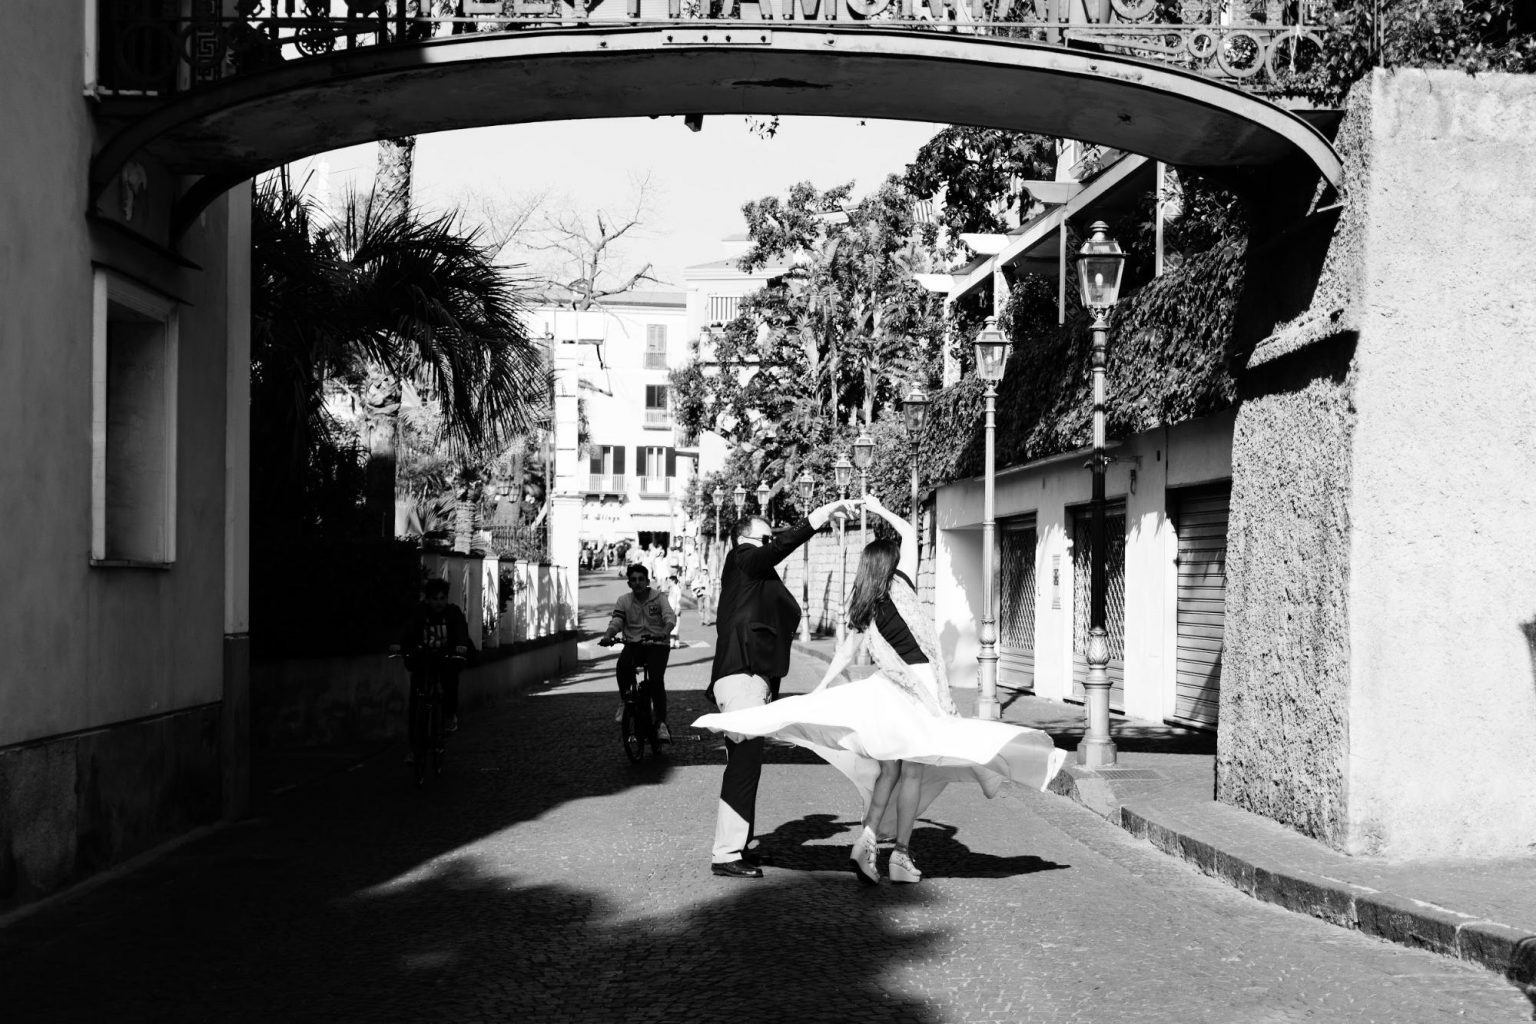 A black and white wedding photo of a bride and groom walking down a street.